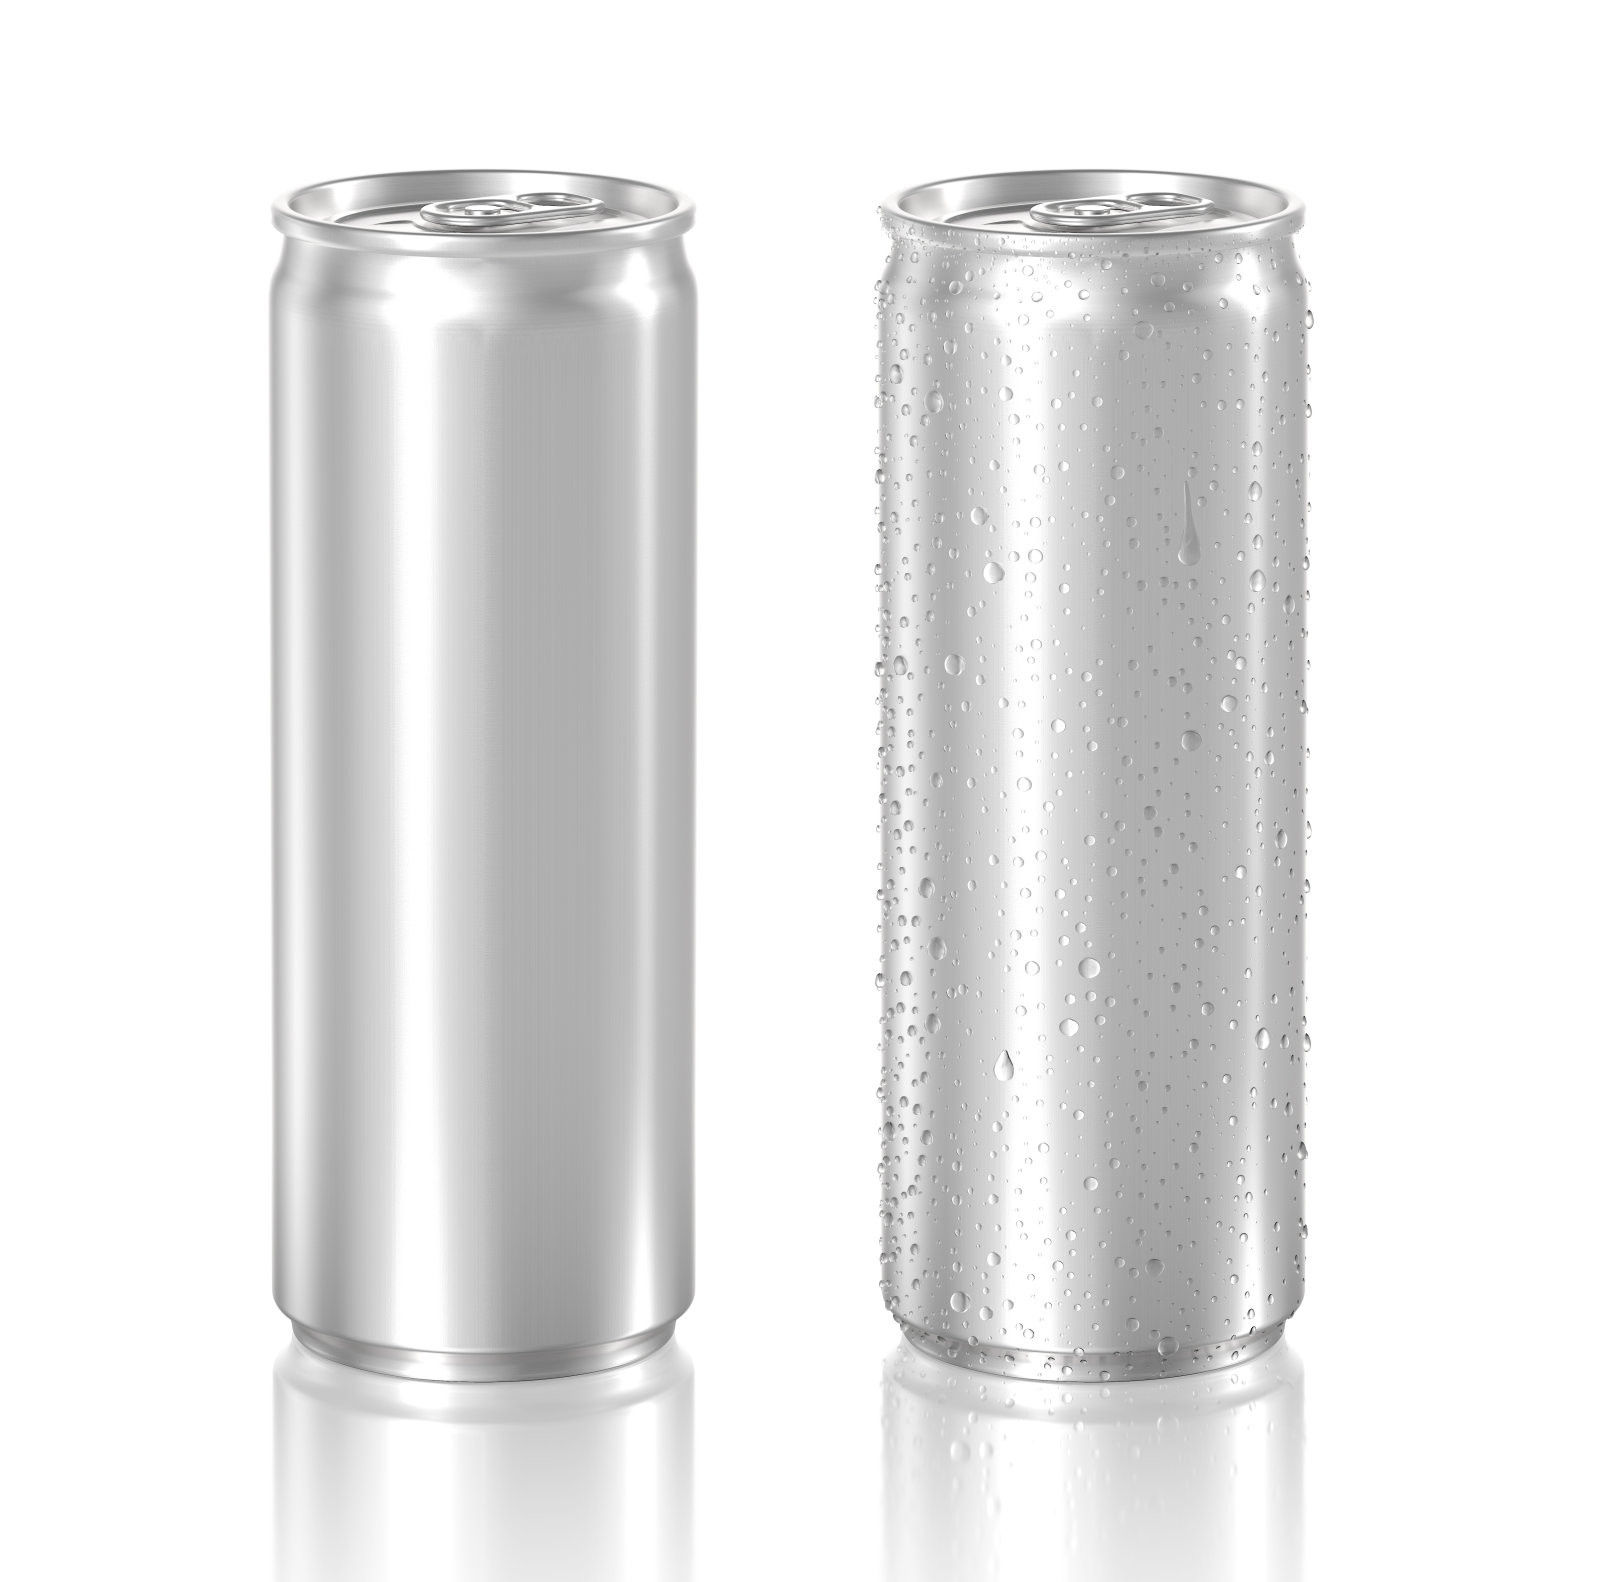 Quality BPA Free 12oz 355ml Sleek Matte Printed Aluminum Cans for sale